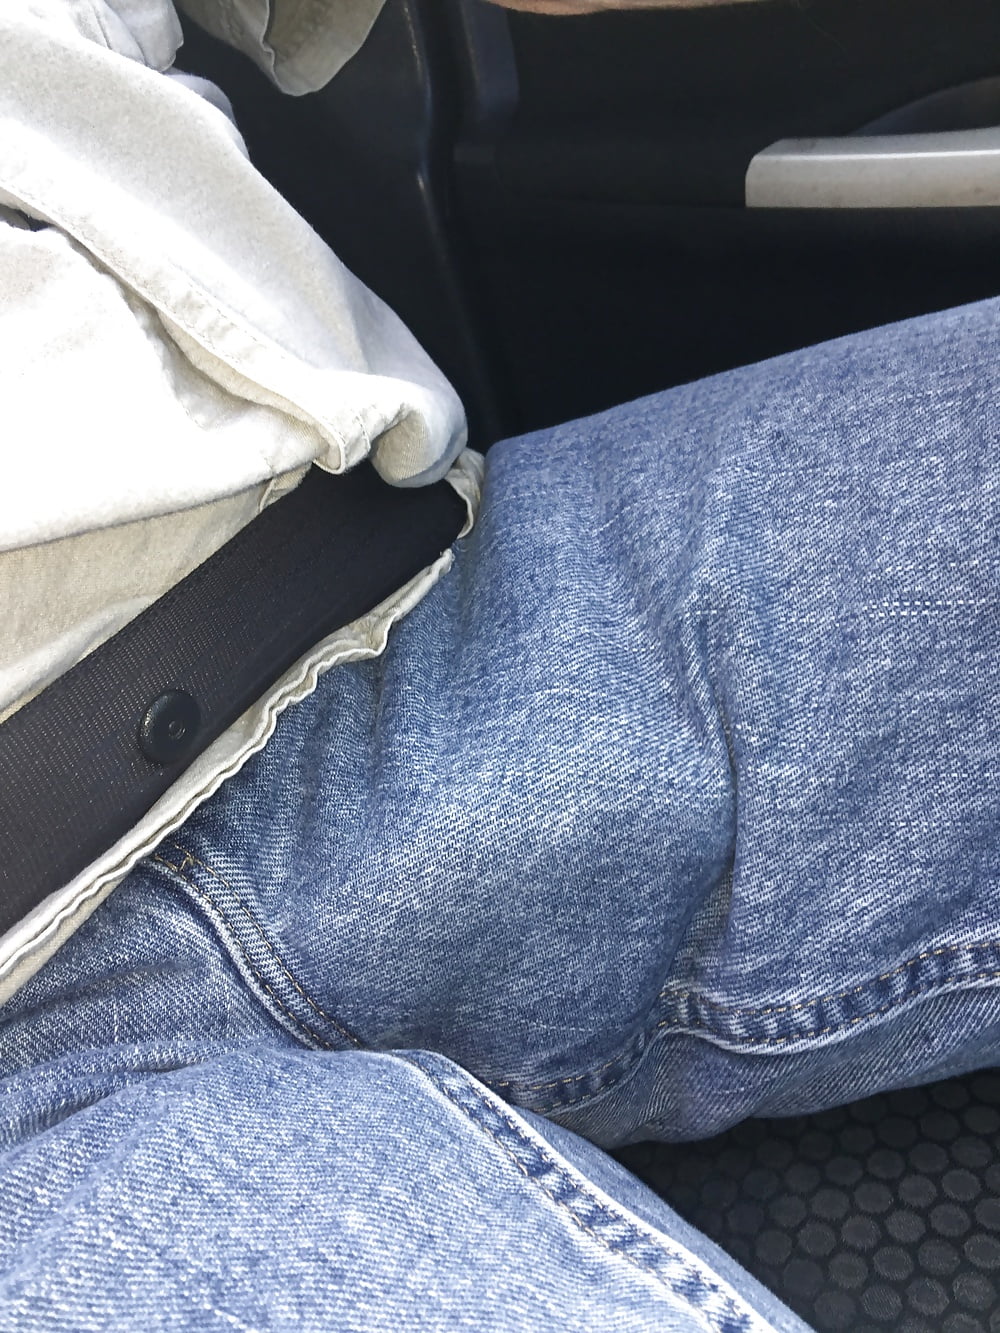 Hard cock tight jeans